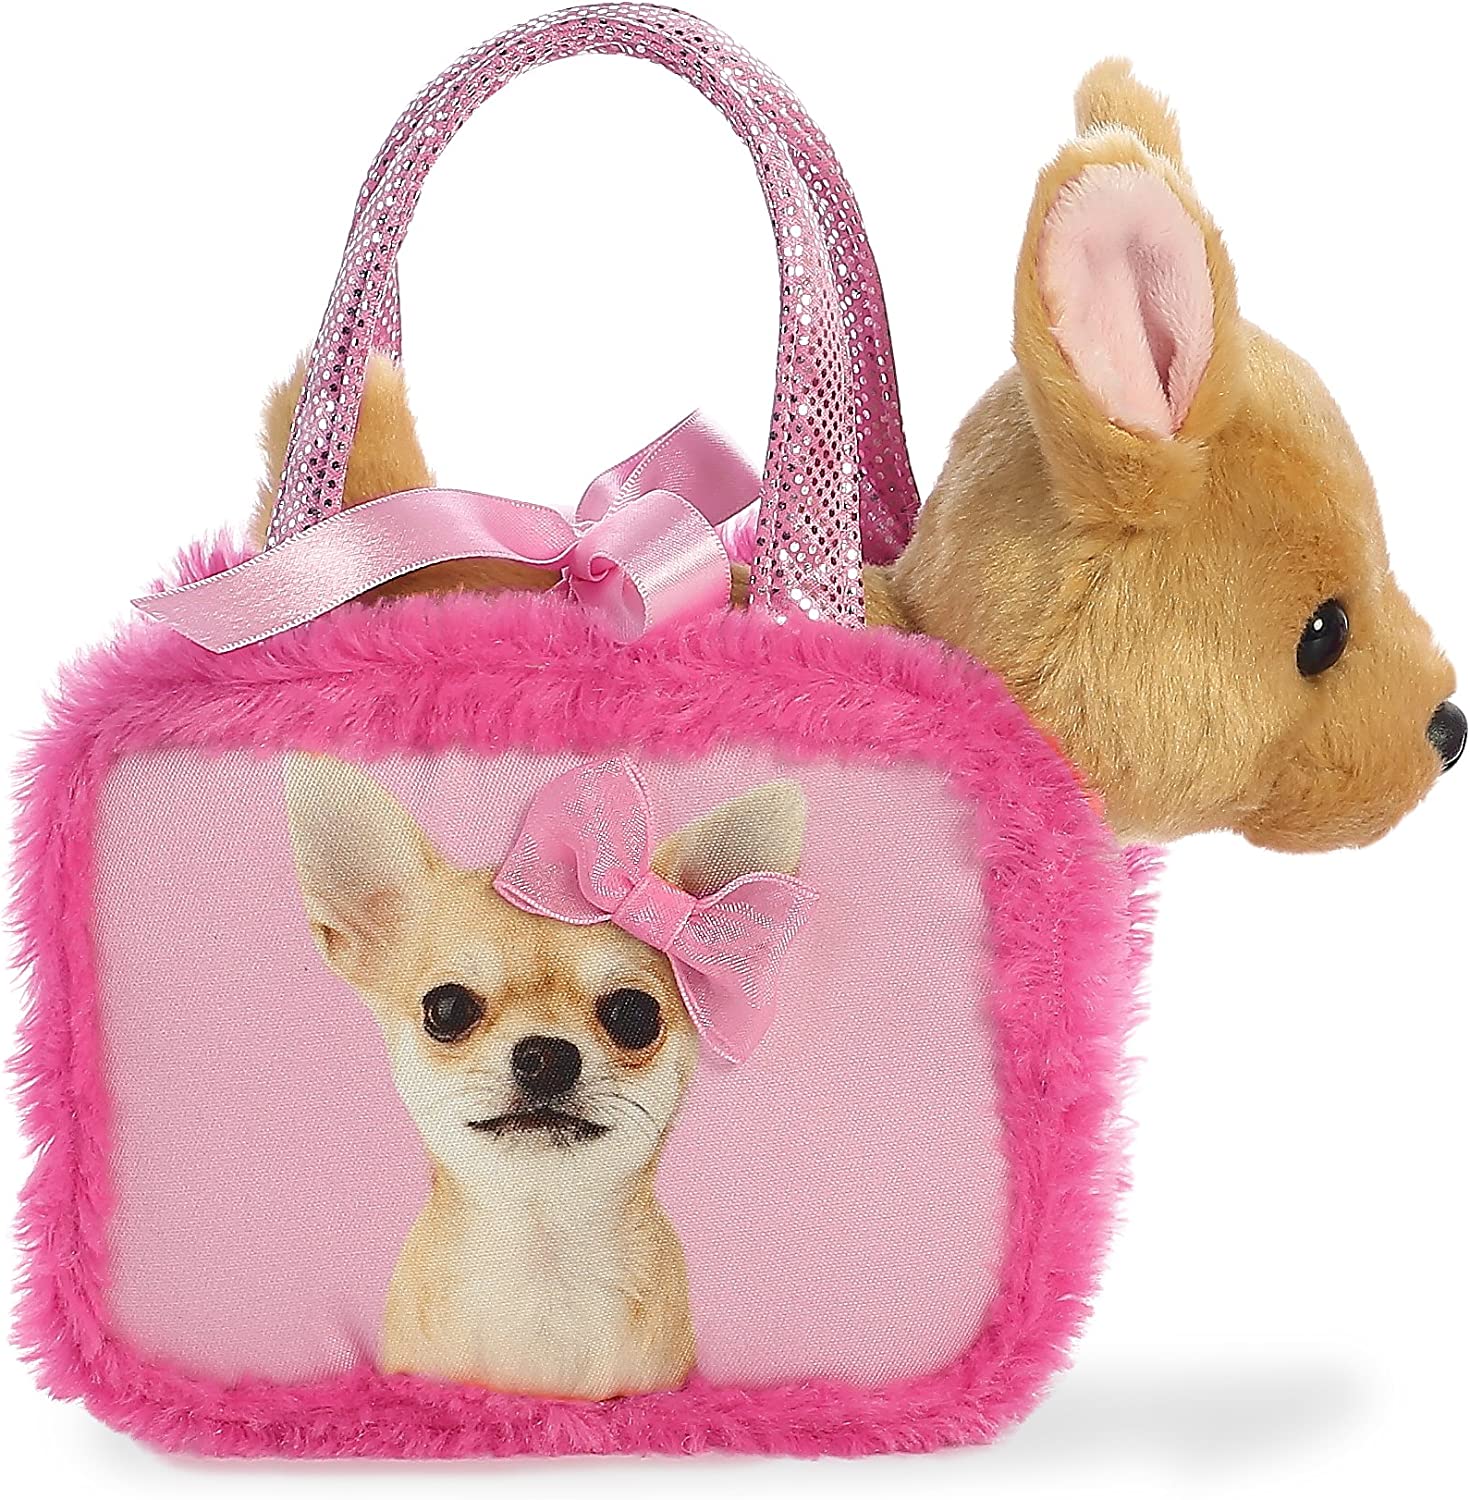 PET CARRIER PRETTY IN PINK 7 INCH